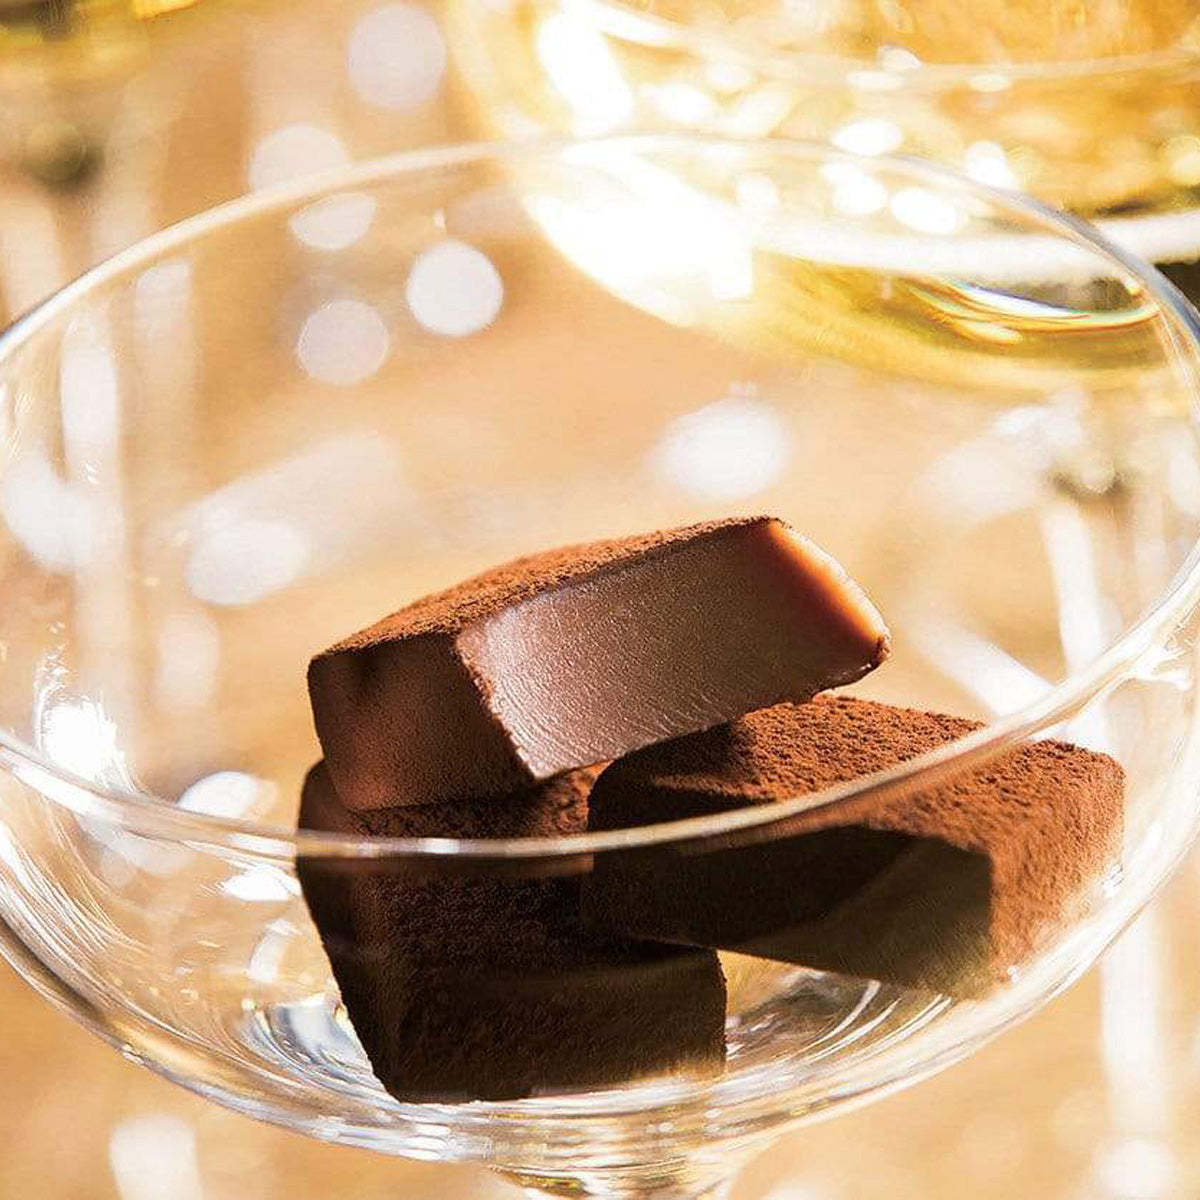 ROYCE' Chocolate - Nama Chocolate "Champagne Pierre Mignon" - Image shows brown blocks of chocolates in a clear champagne glass. Background is yellow and there is an accent of a blurry glass filled with yellow champagne.